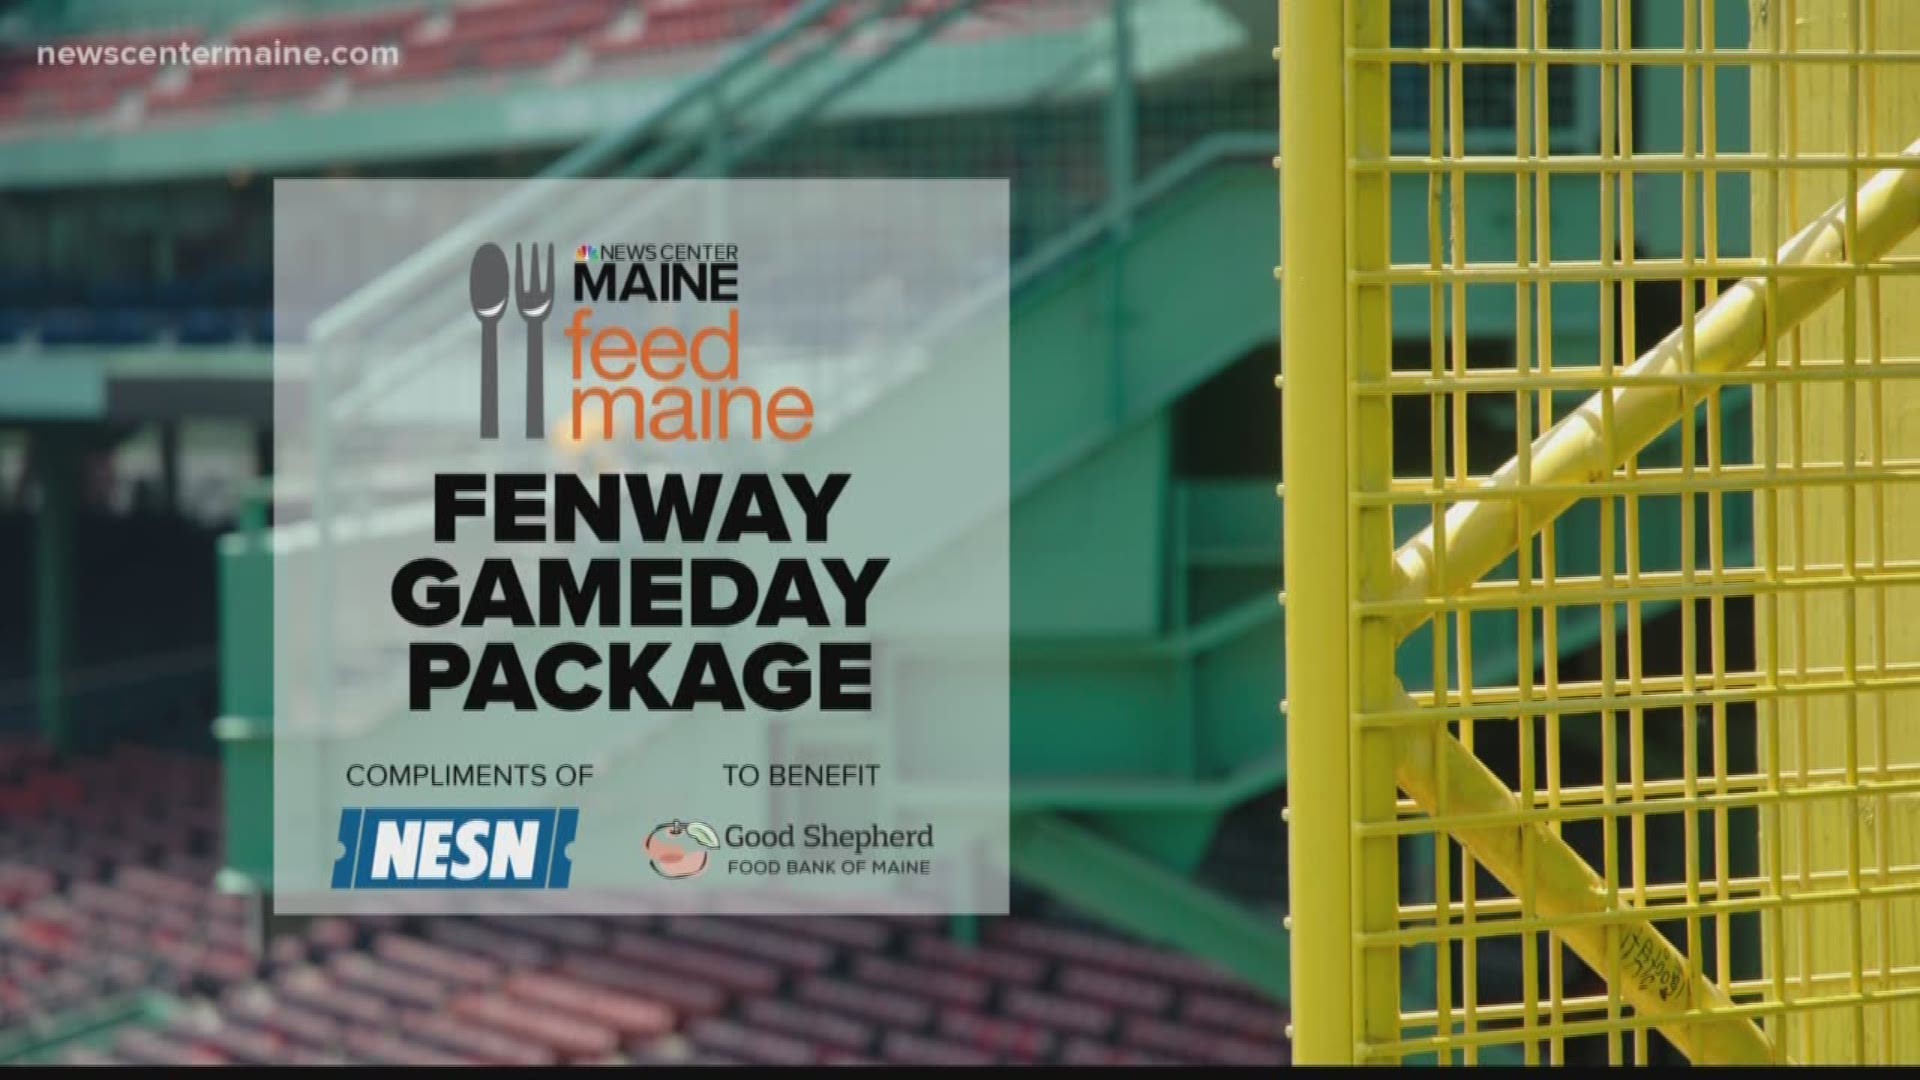 You can bid online at newscentermaine.com for a chance to win a Fenway gameday package and help Mainers!